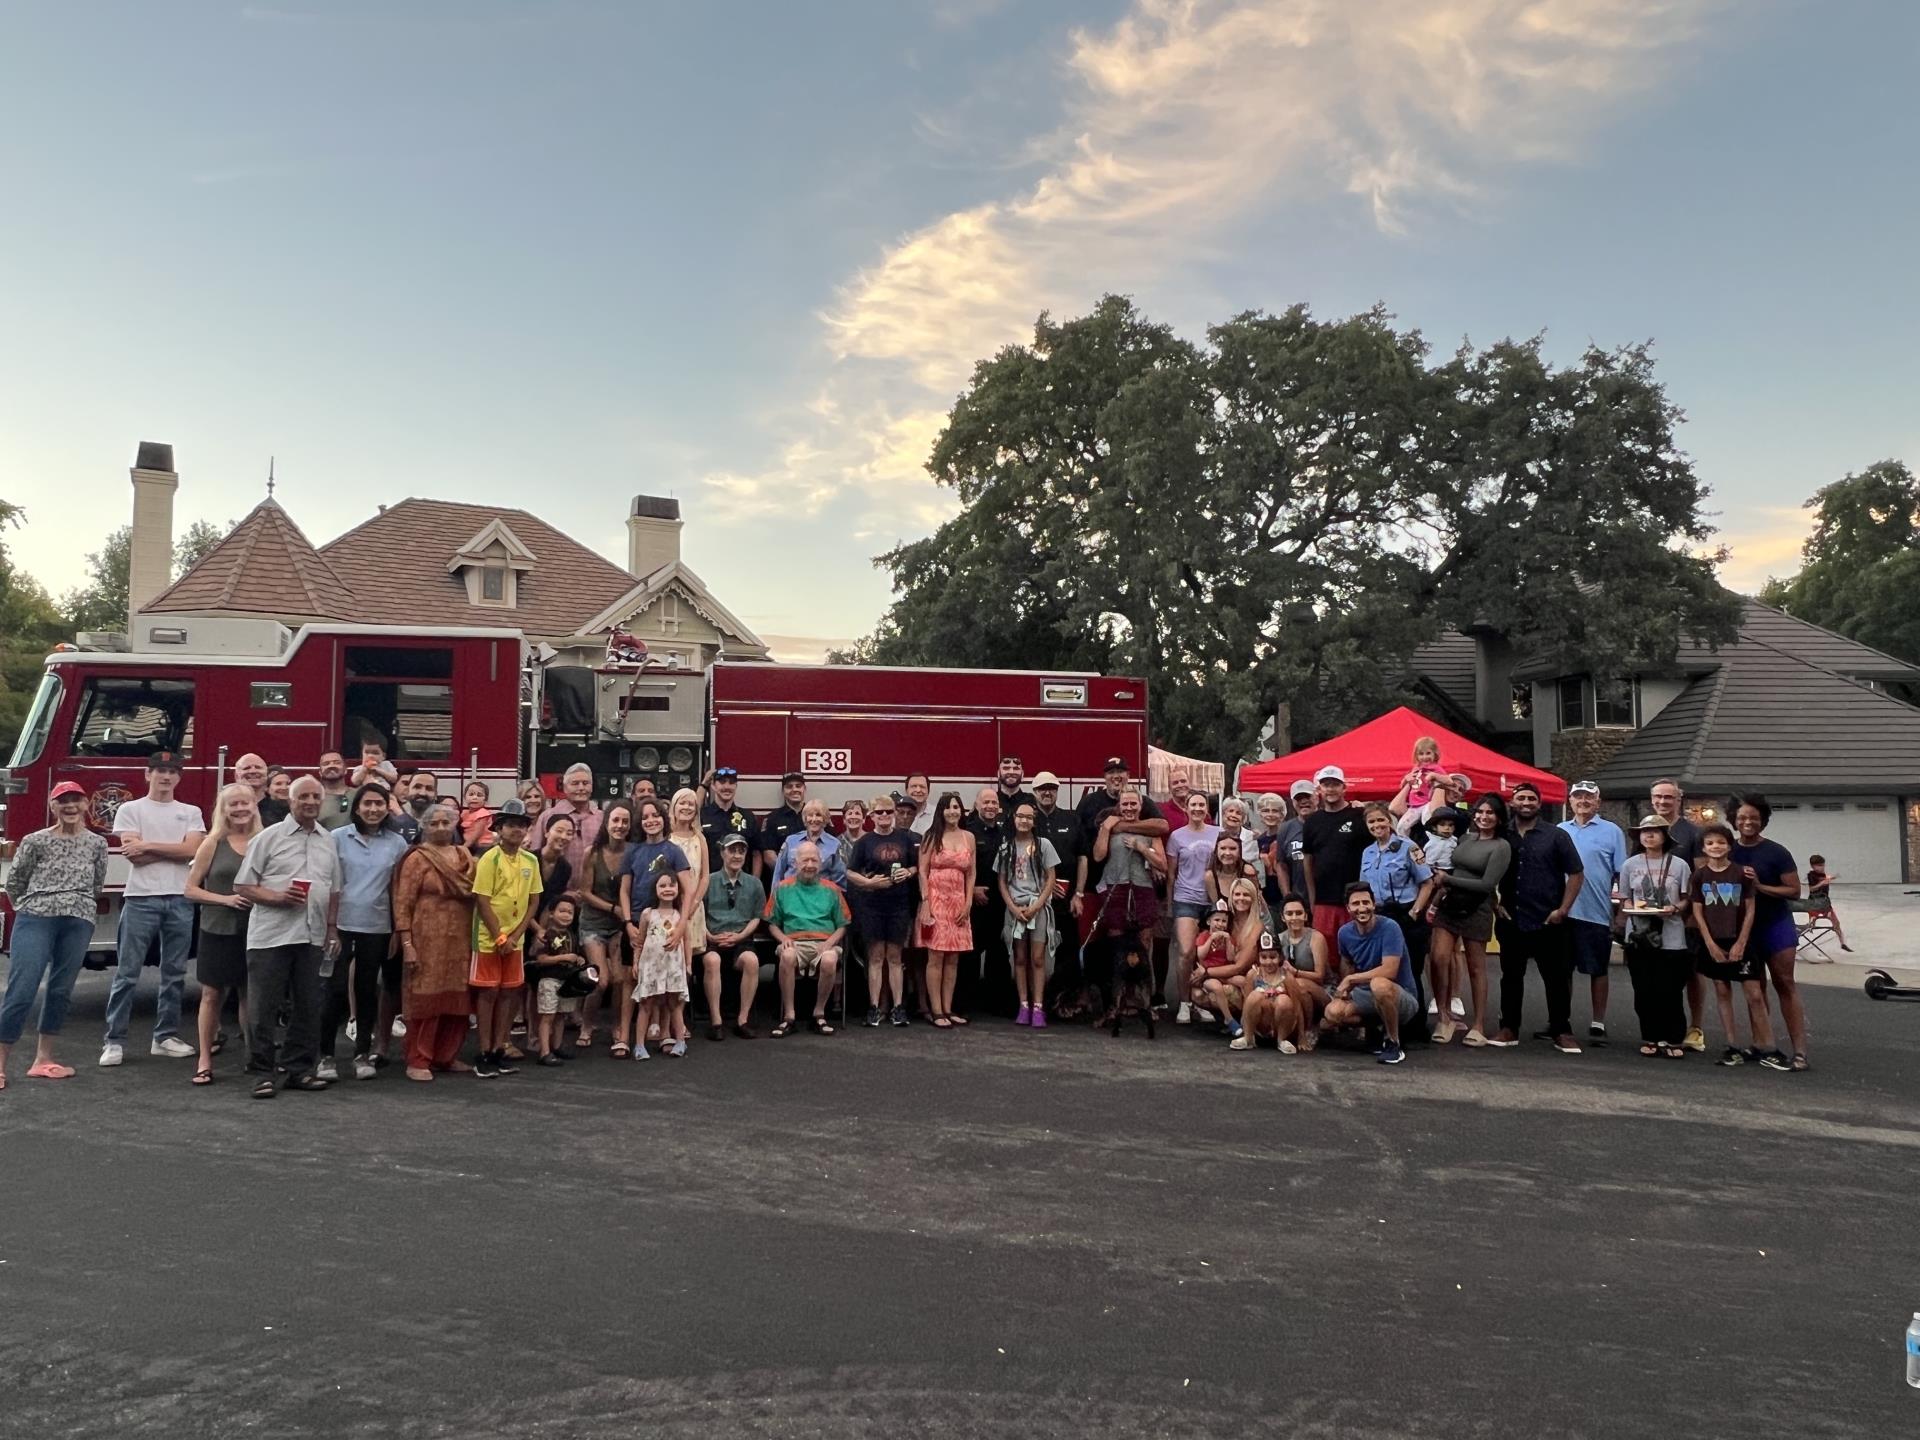 Neighborhood group with Folsom Police Officers and Firefighters in front of a Folsom Fire Truck